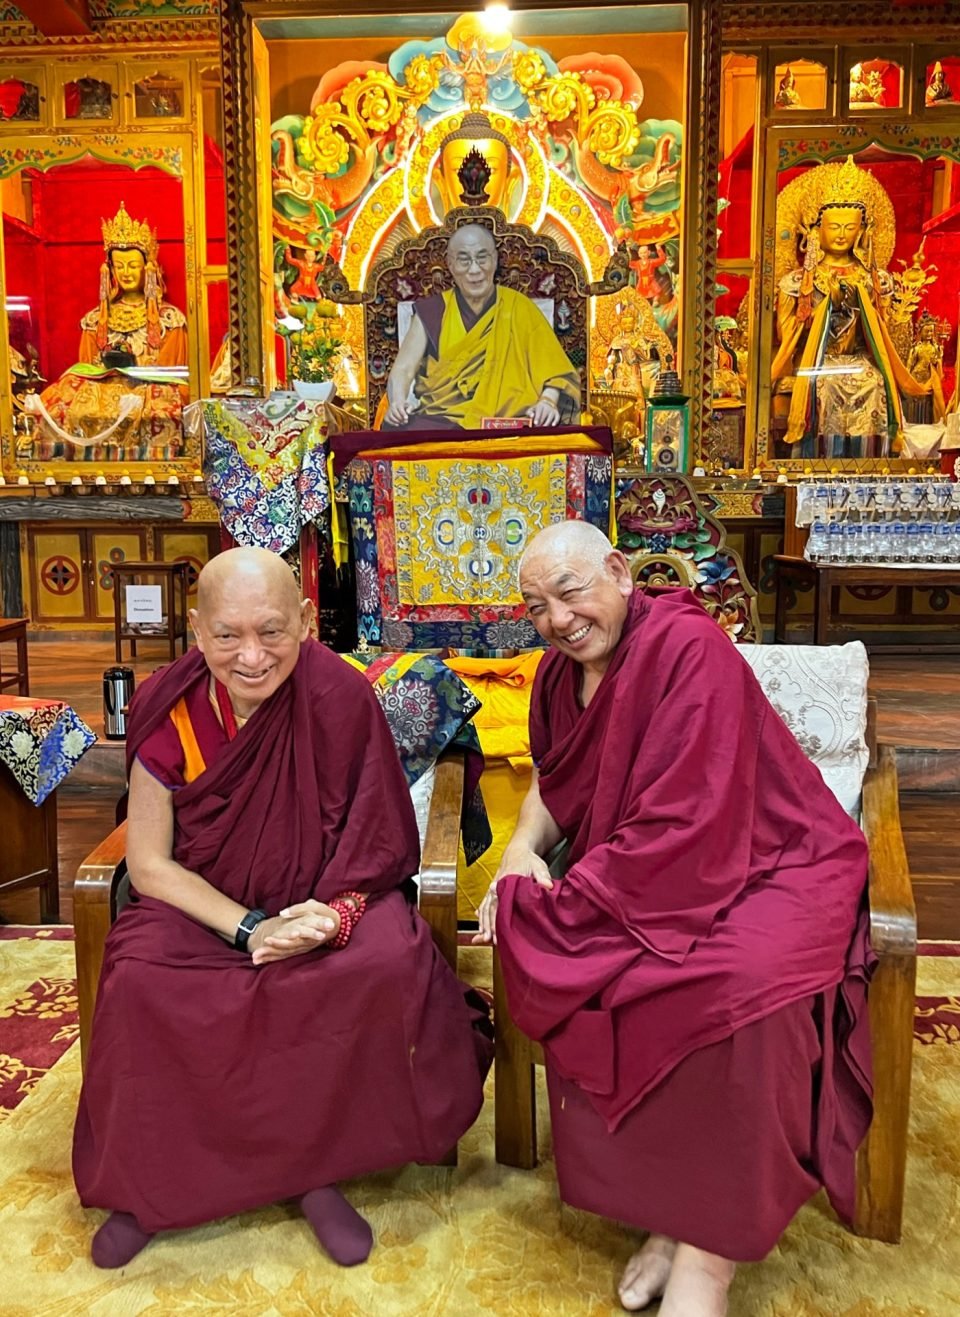 Advice from Geshe Thupten Rinchen Rinpoche on the Passing of Lama Zopa Rinpoche